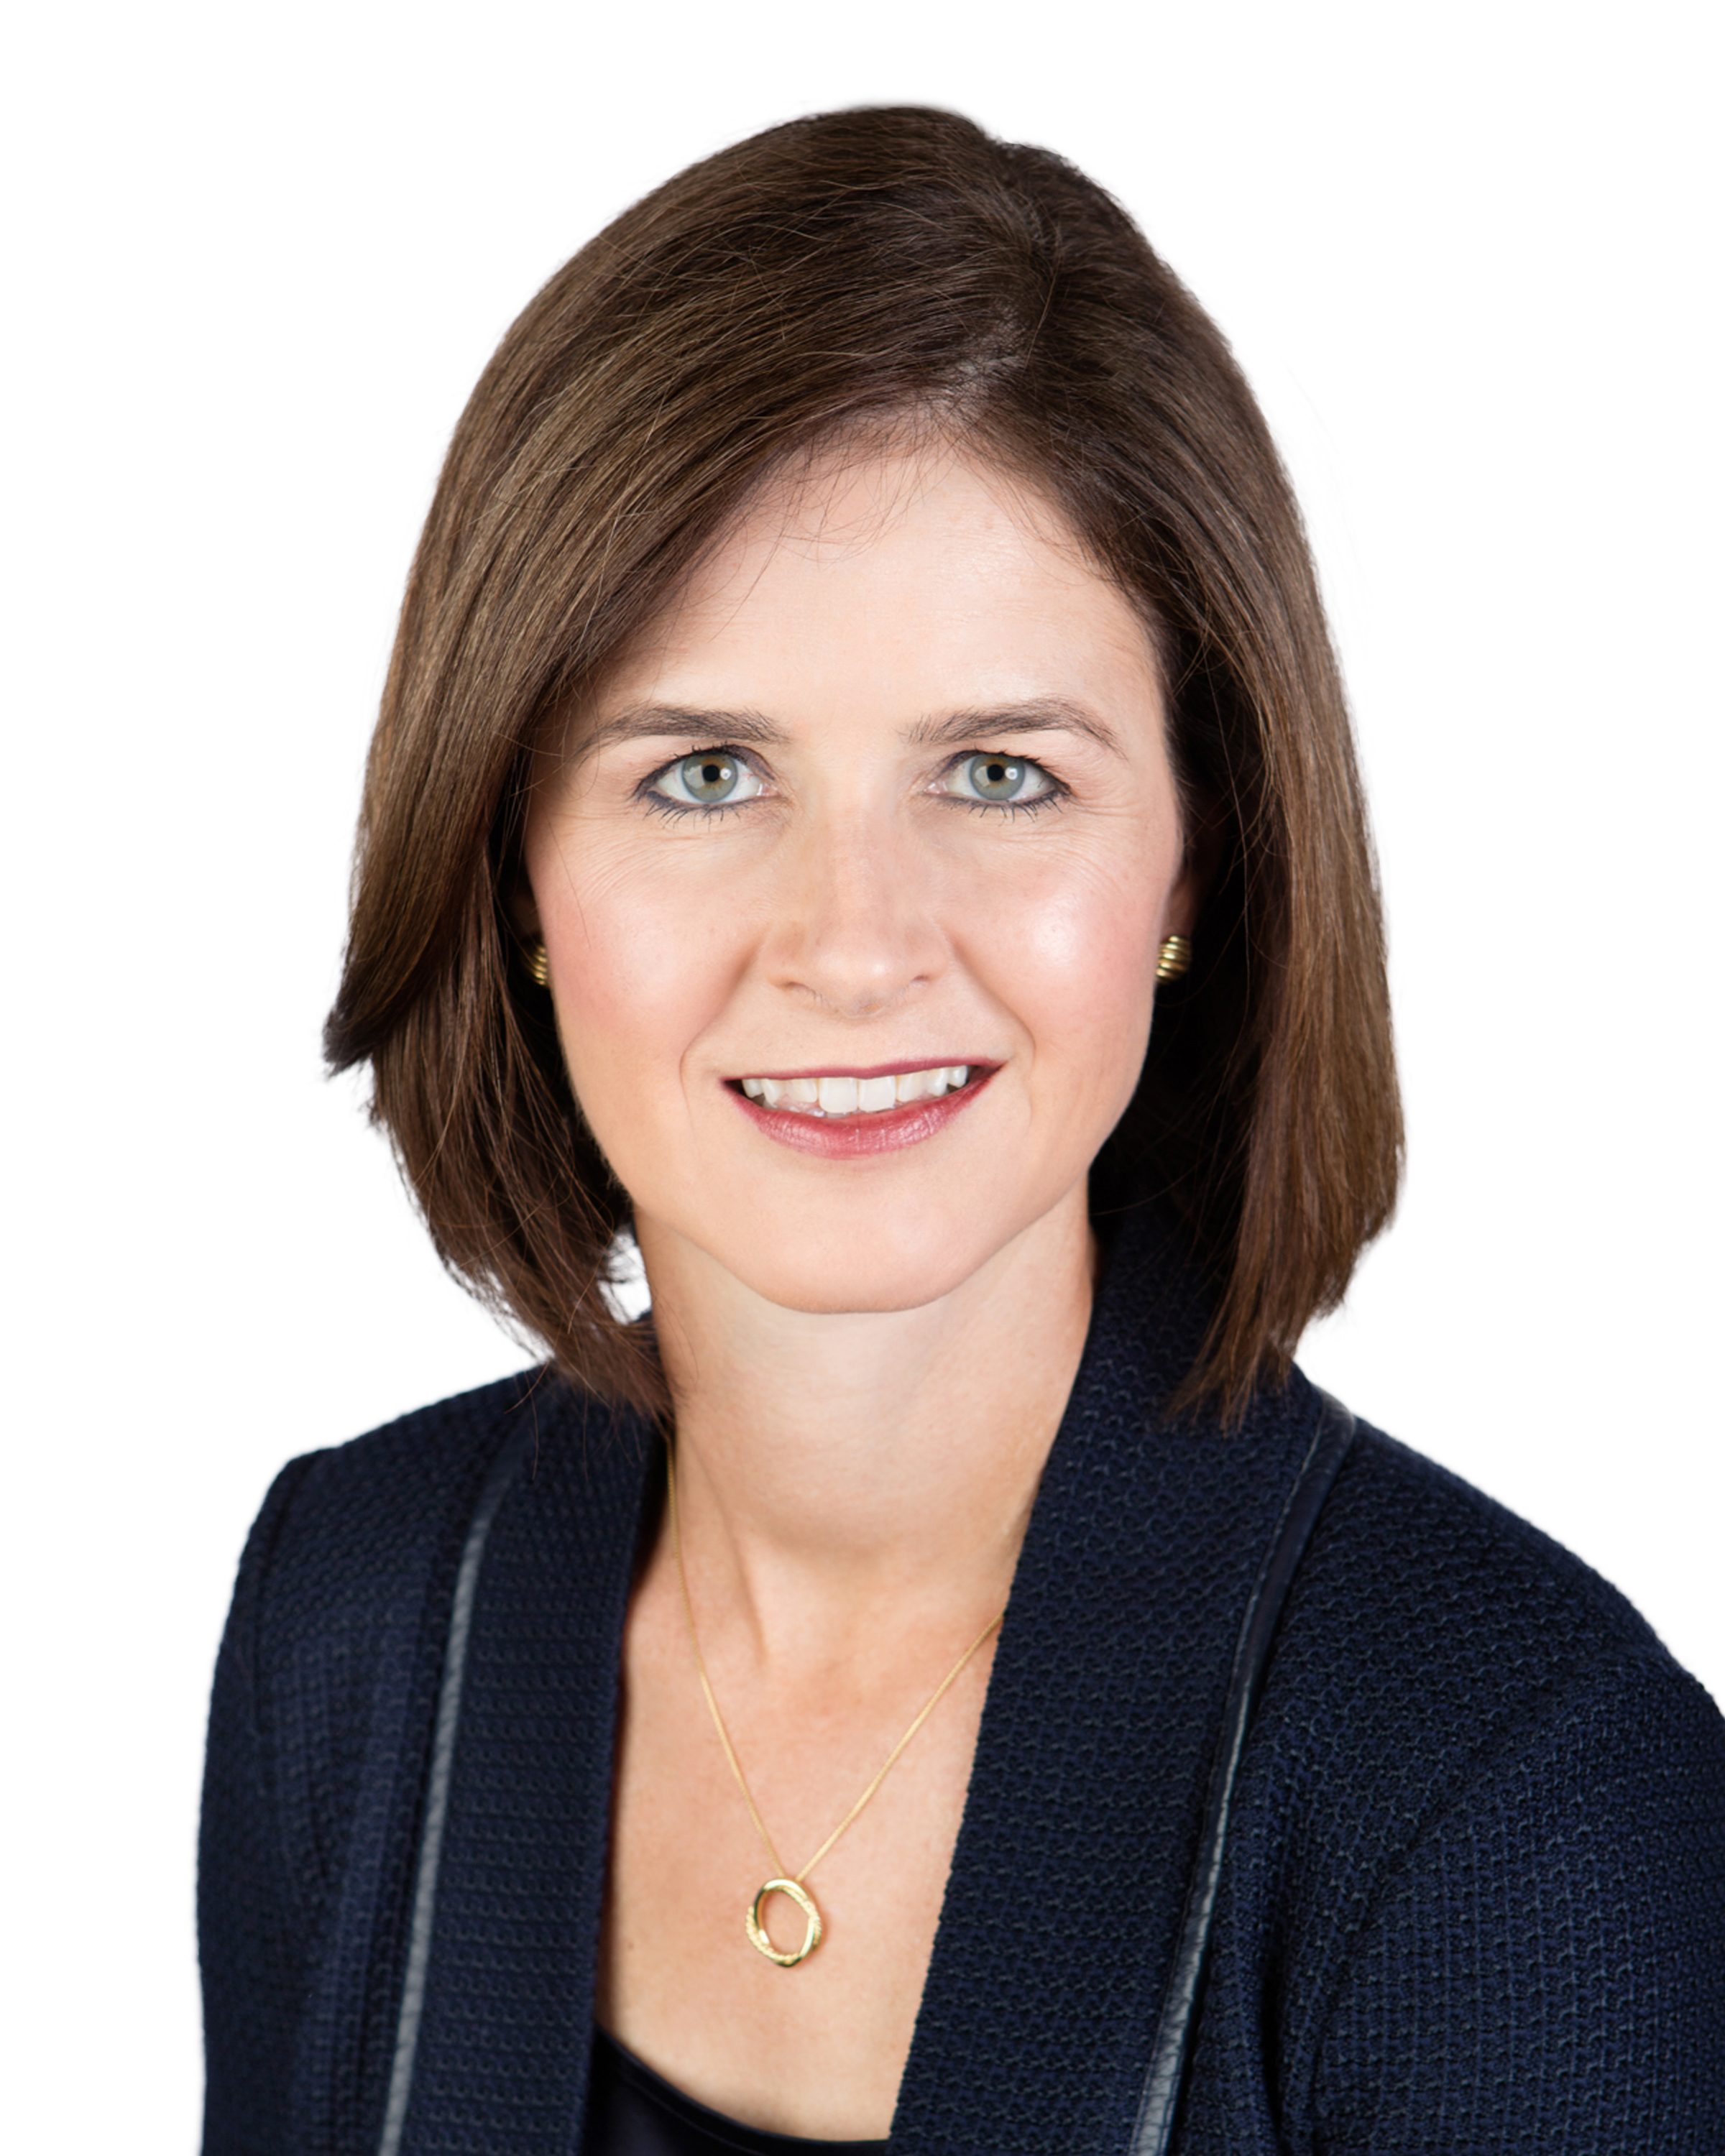 Dr. Catherine Corrigan is the President and Chief Executive Officer of Exponent (EXPO)